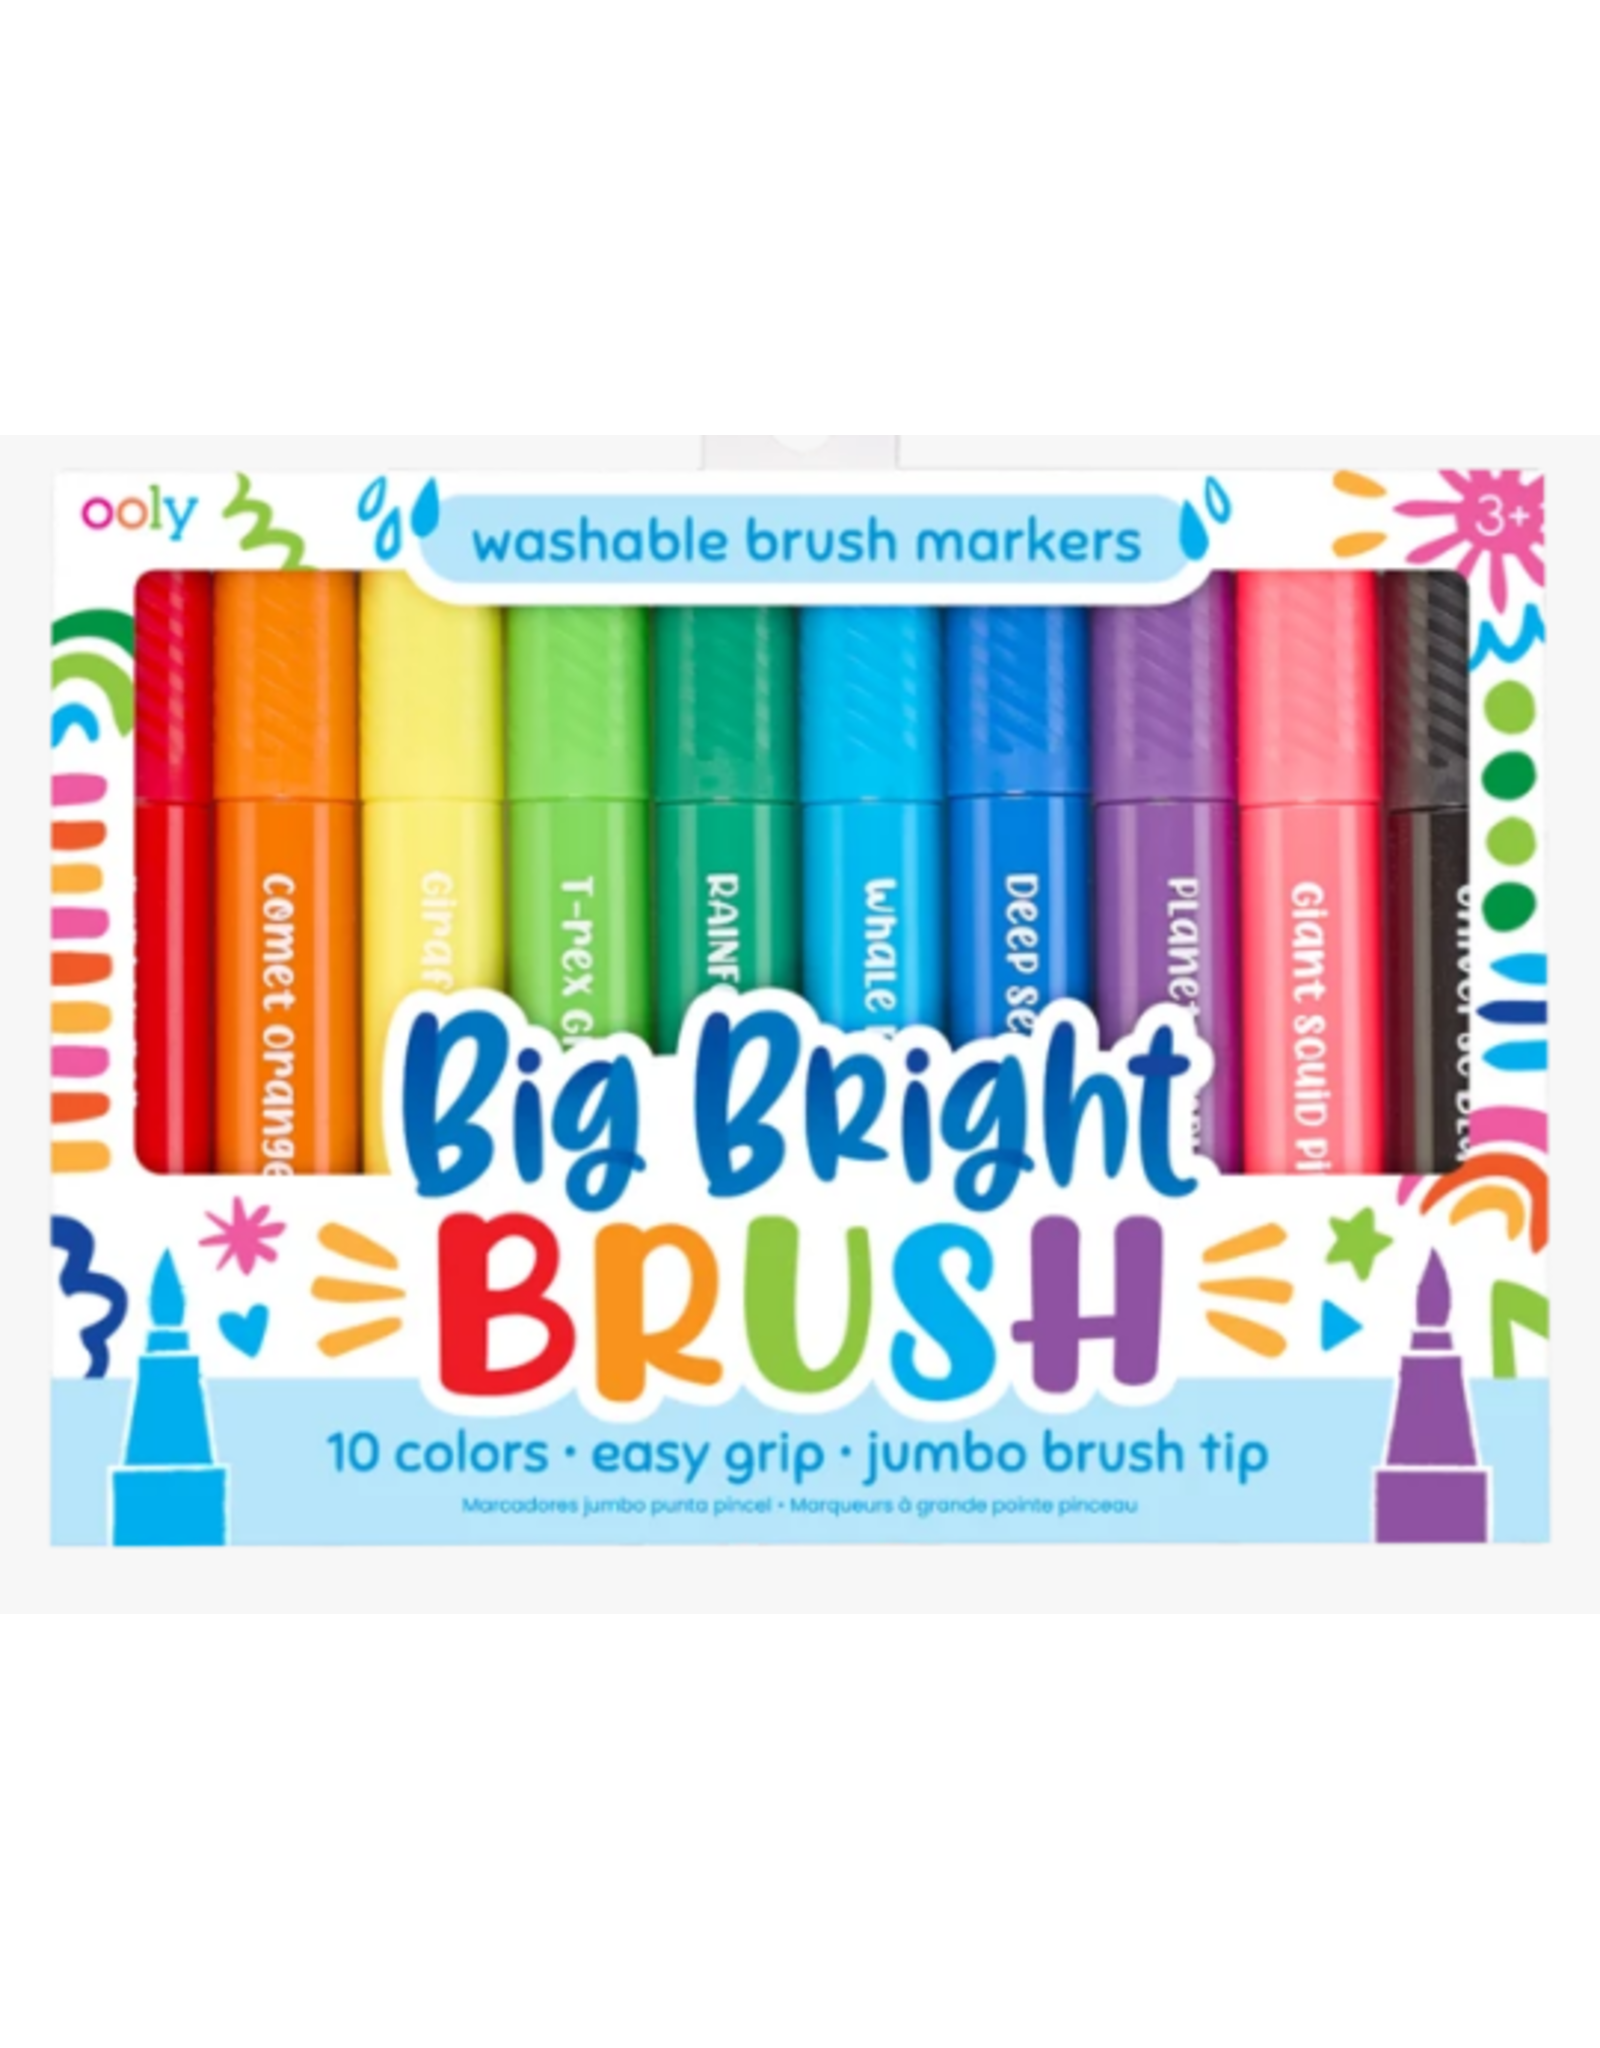 Ooly Big Bright Brush Markers-10 colors